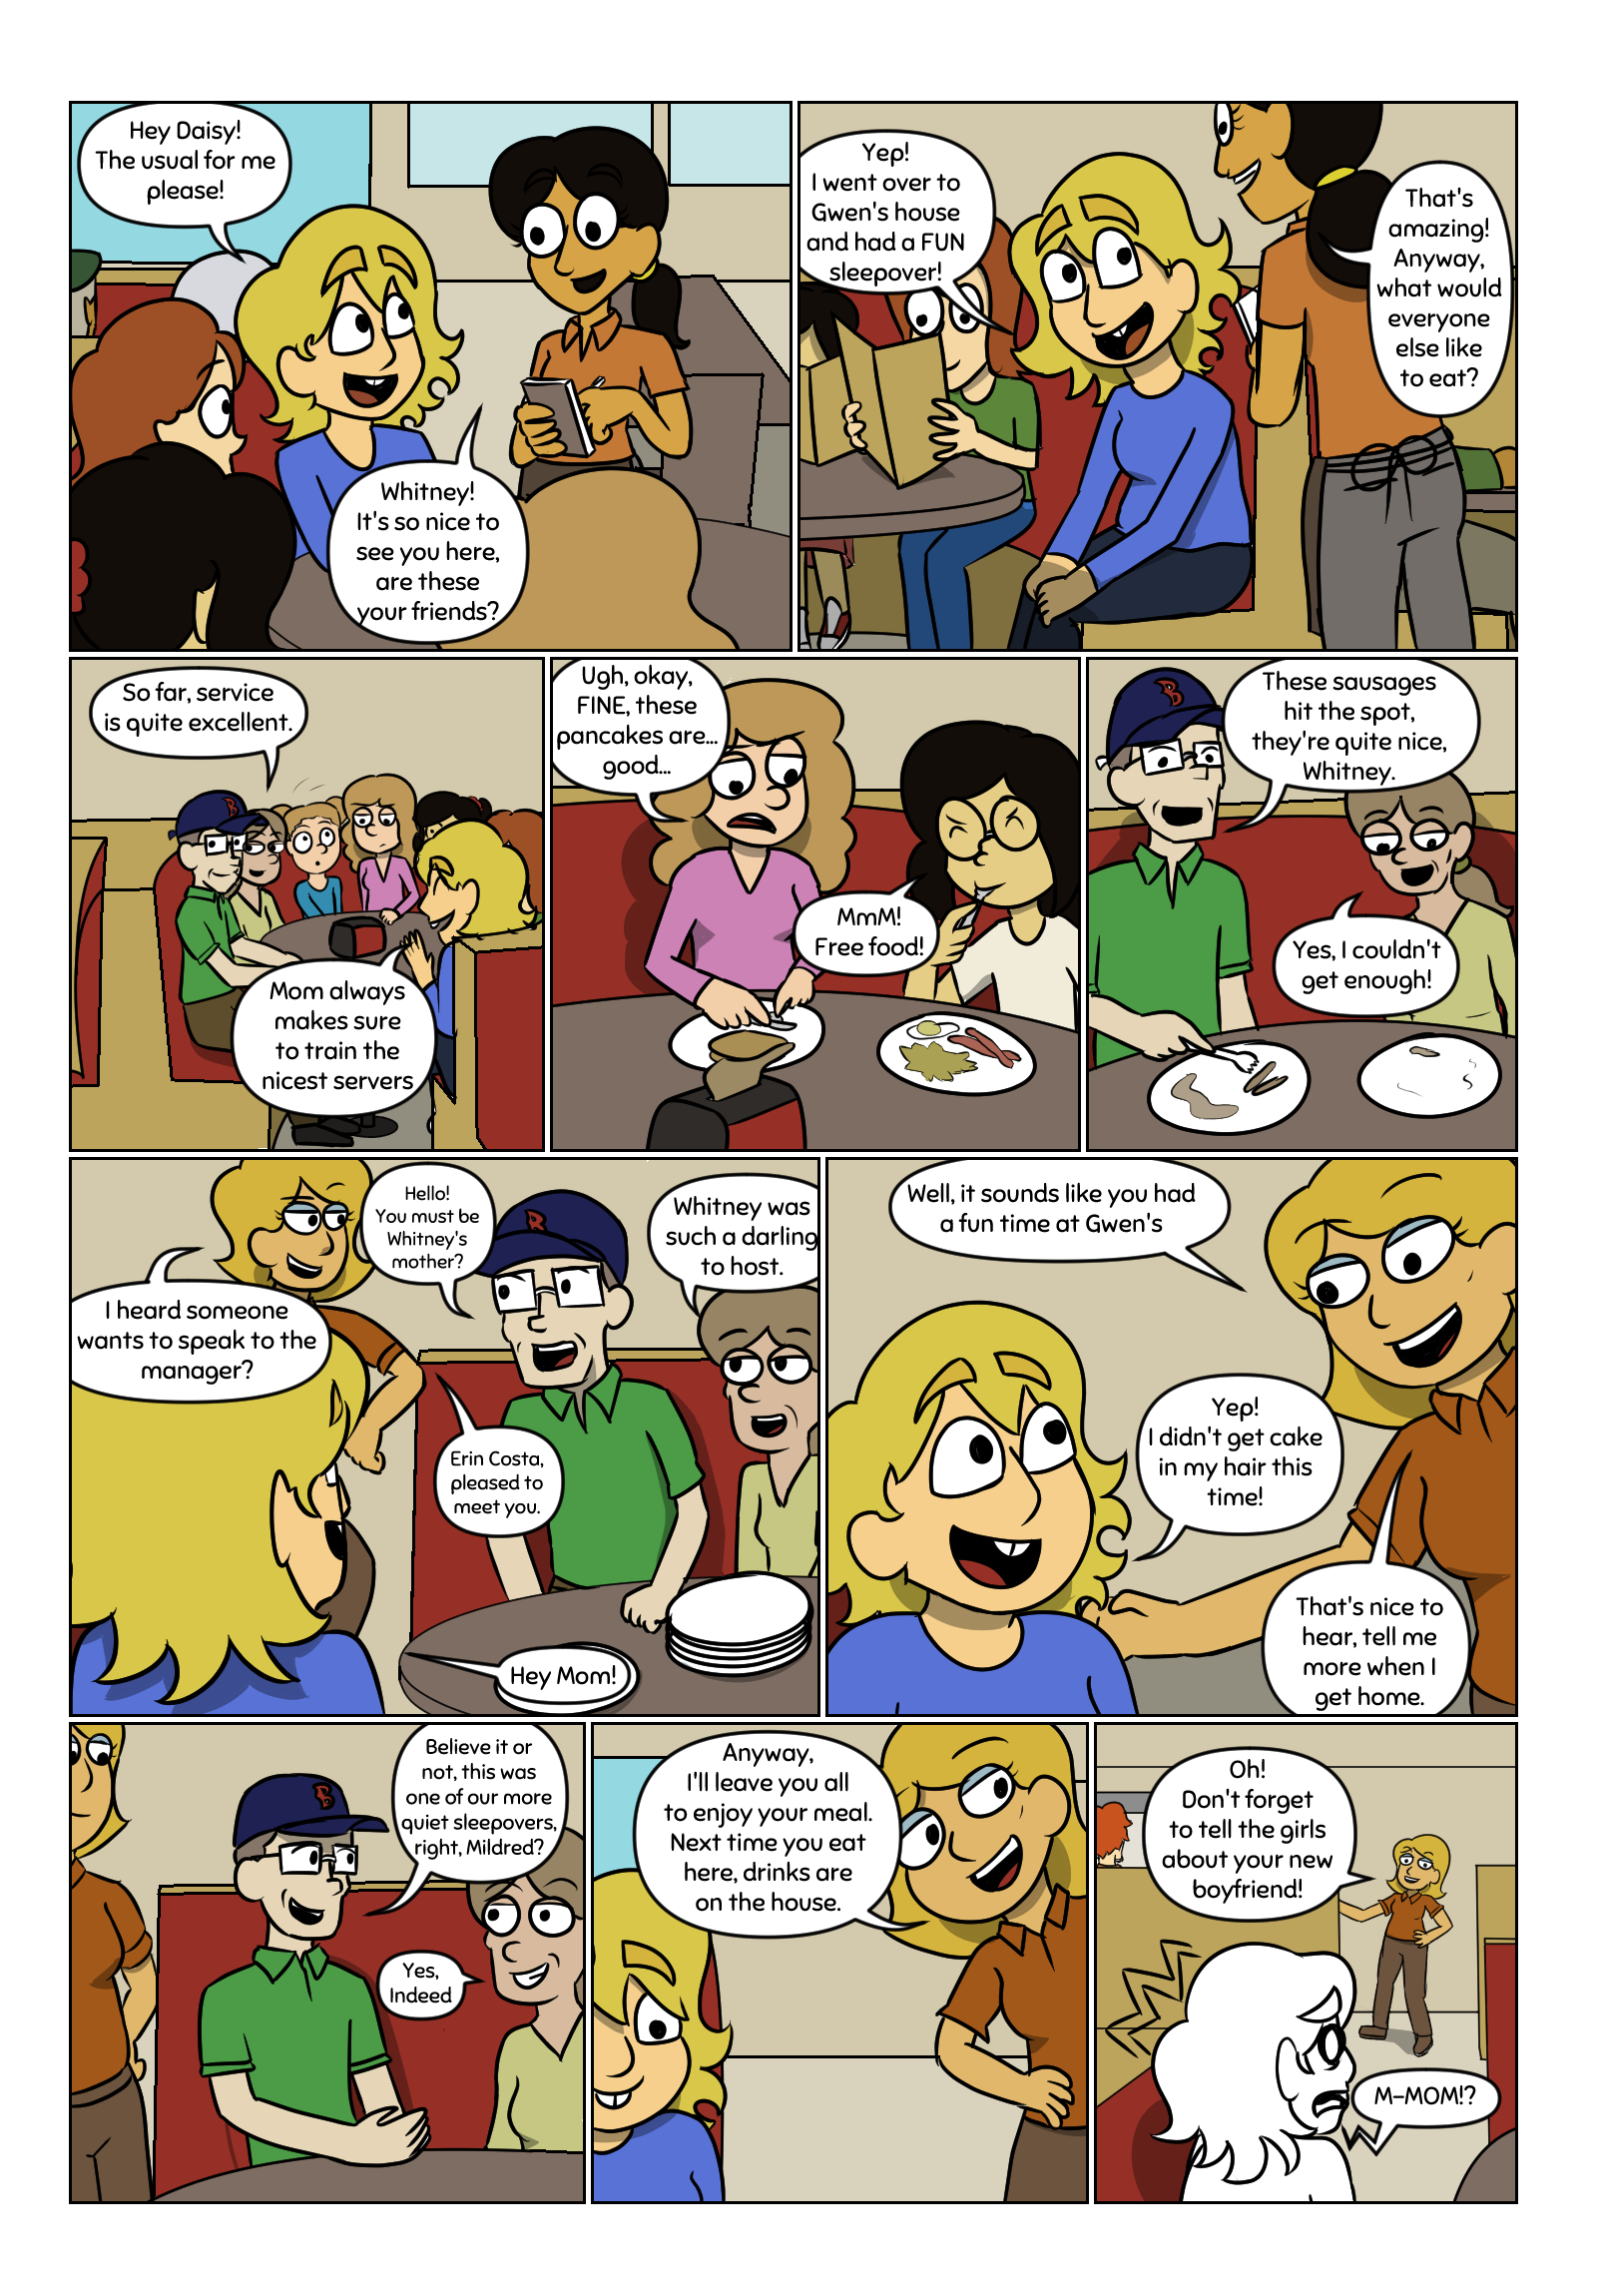 Chapter 7, Page 24